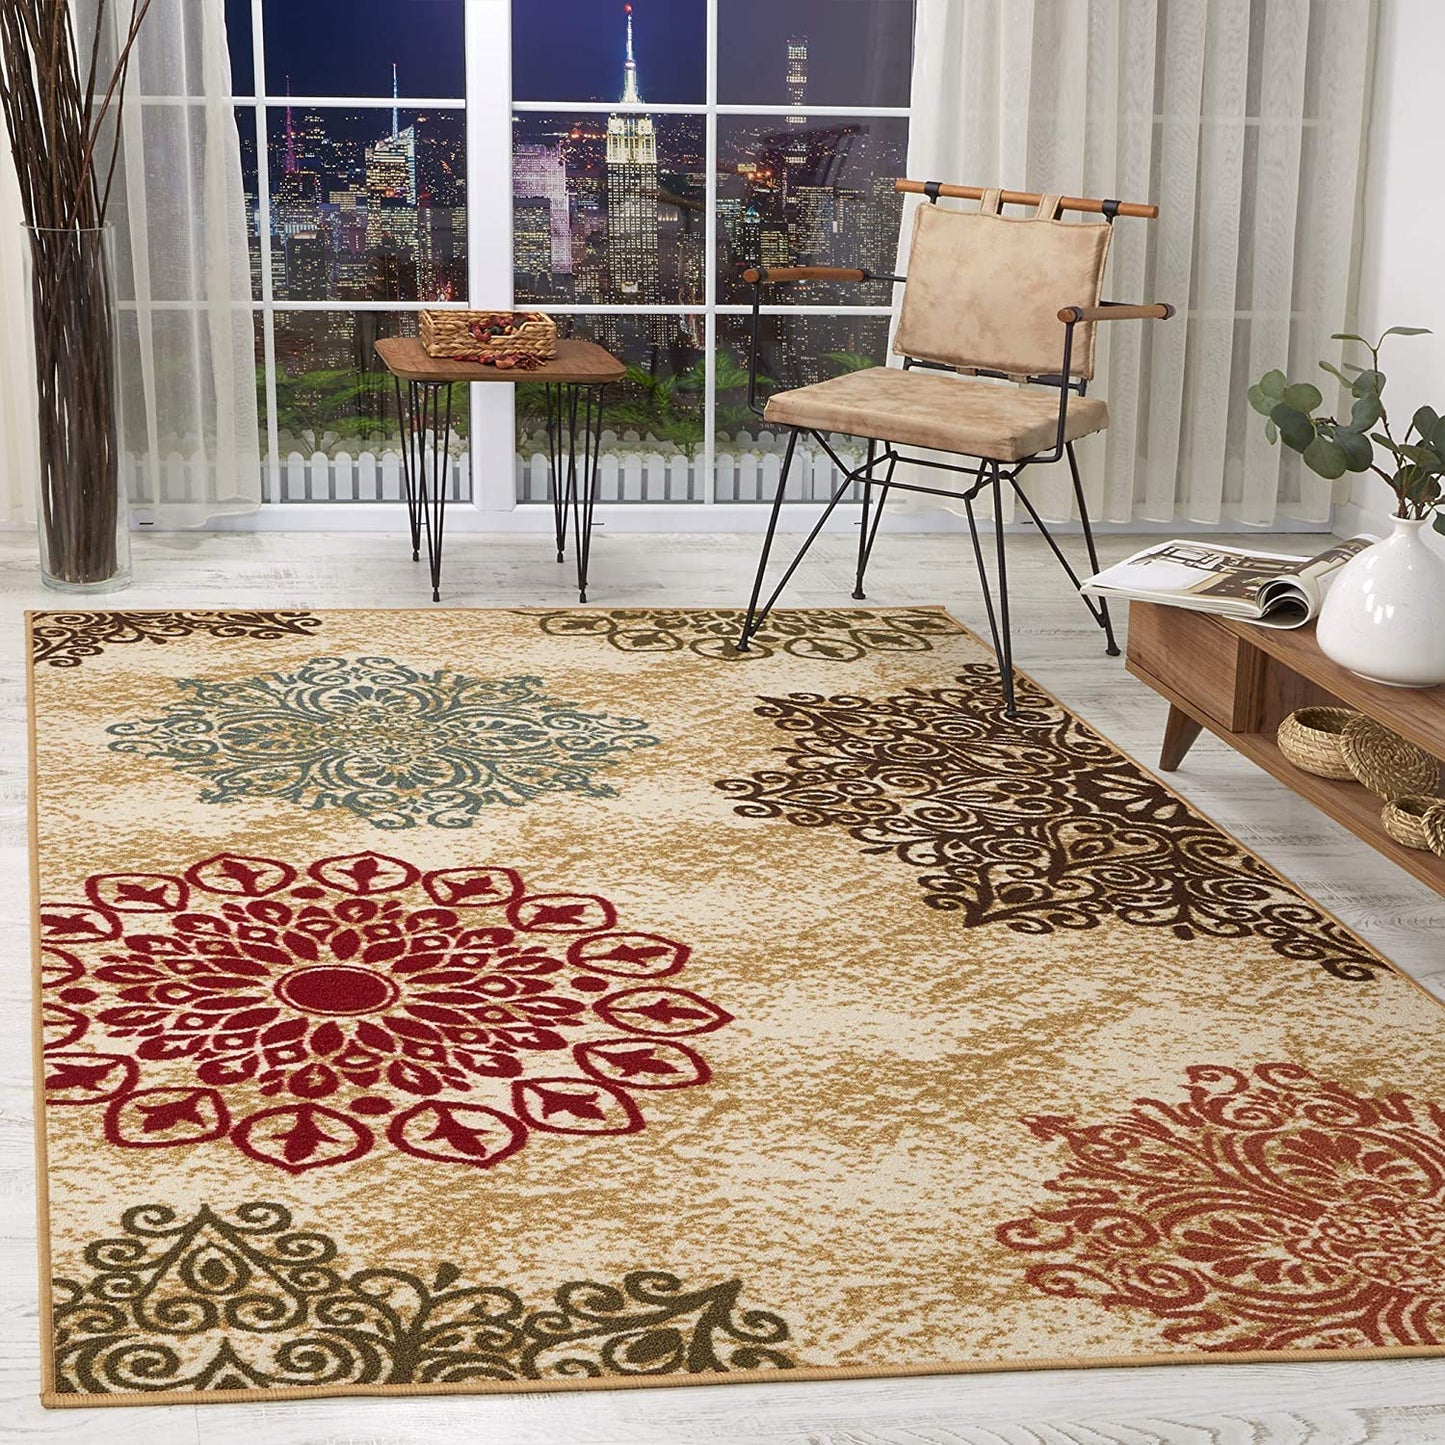 Modern Floral Non-Skid (Non-Slip) Low Profile Pile Rubber Backing Indoor Area Rugs Beige